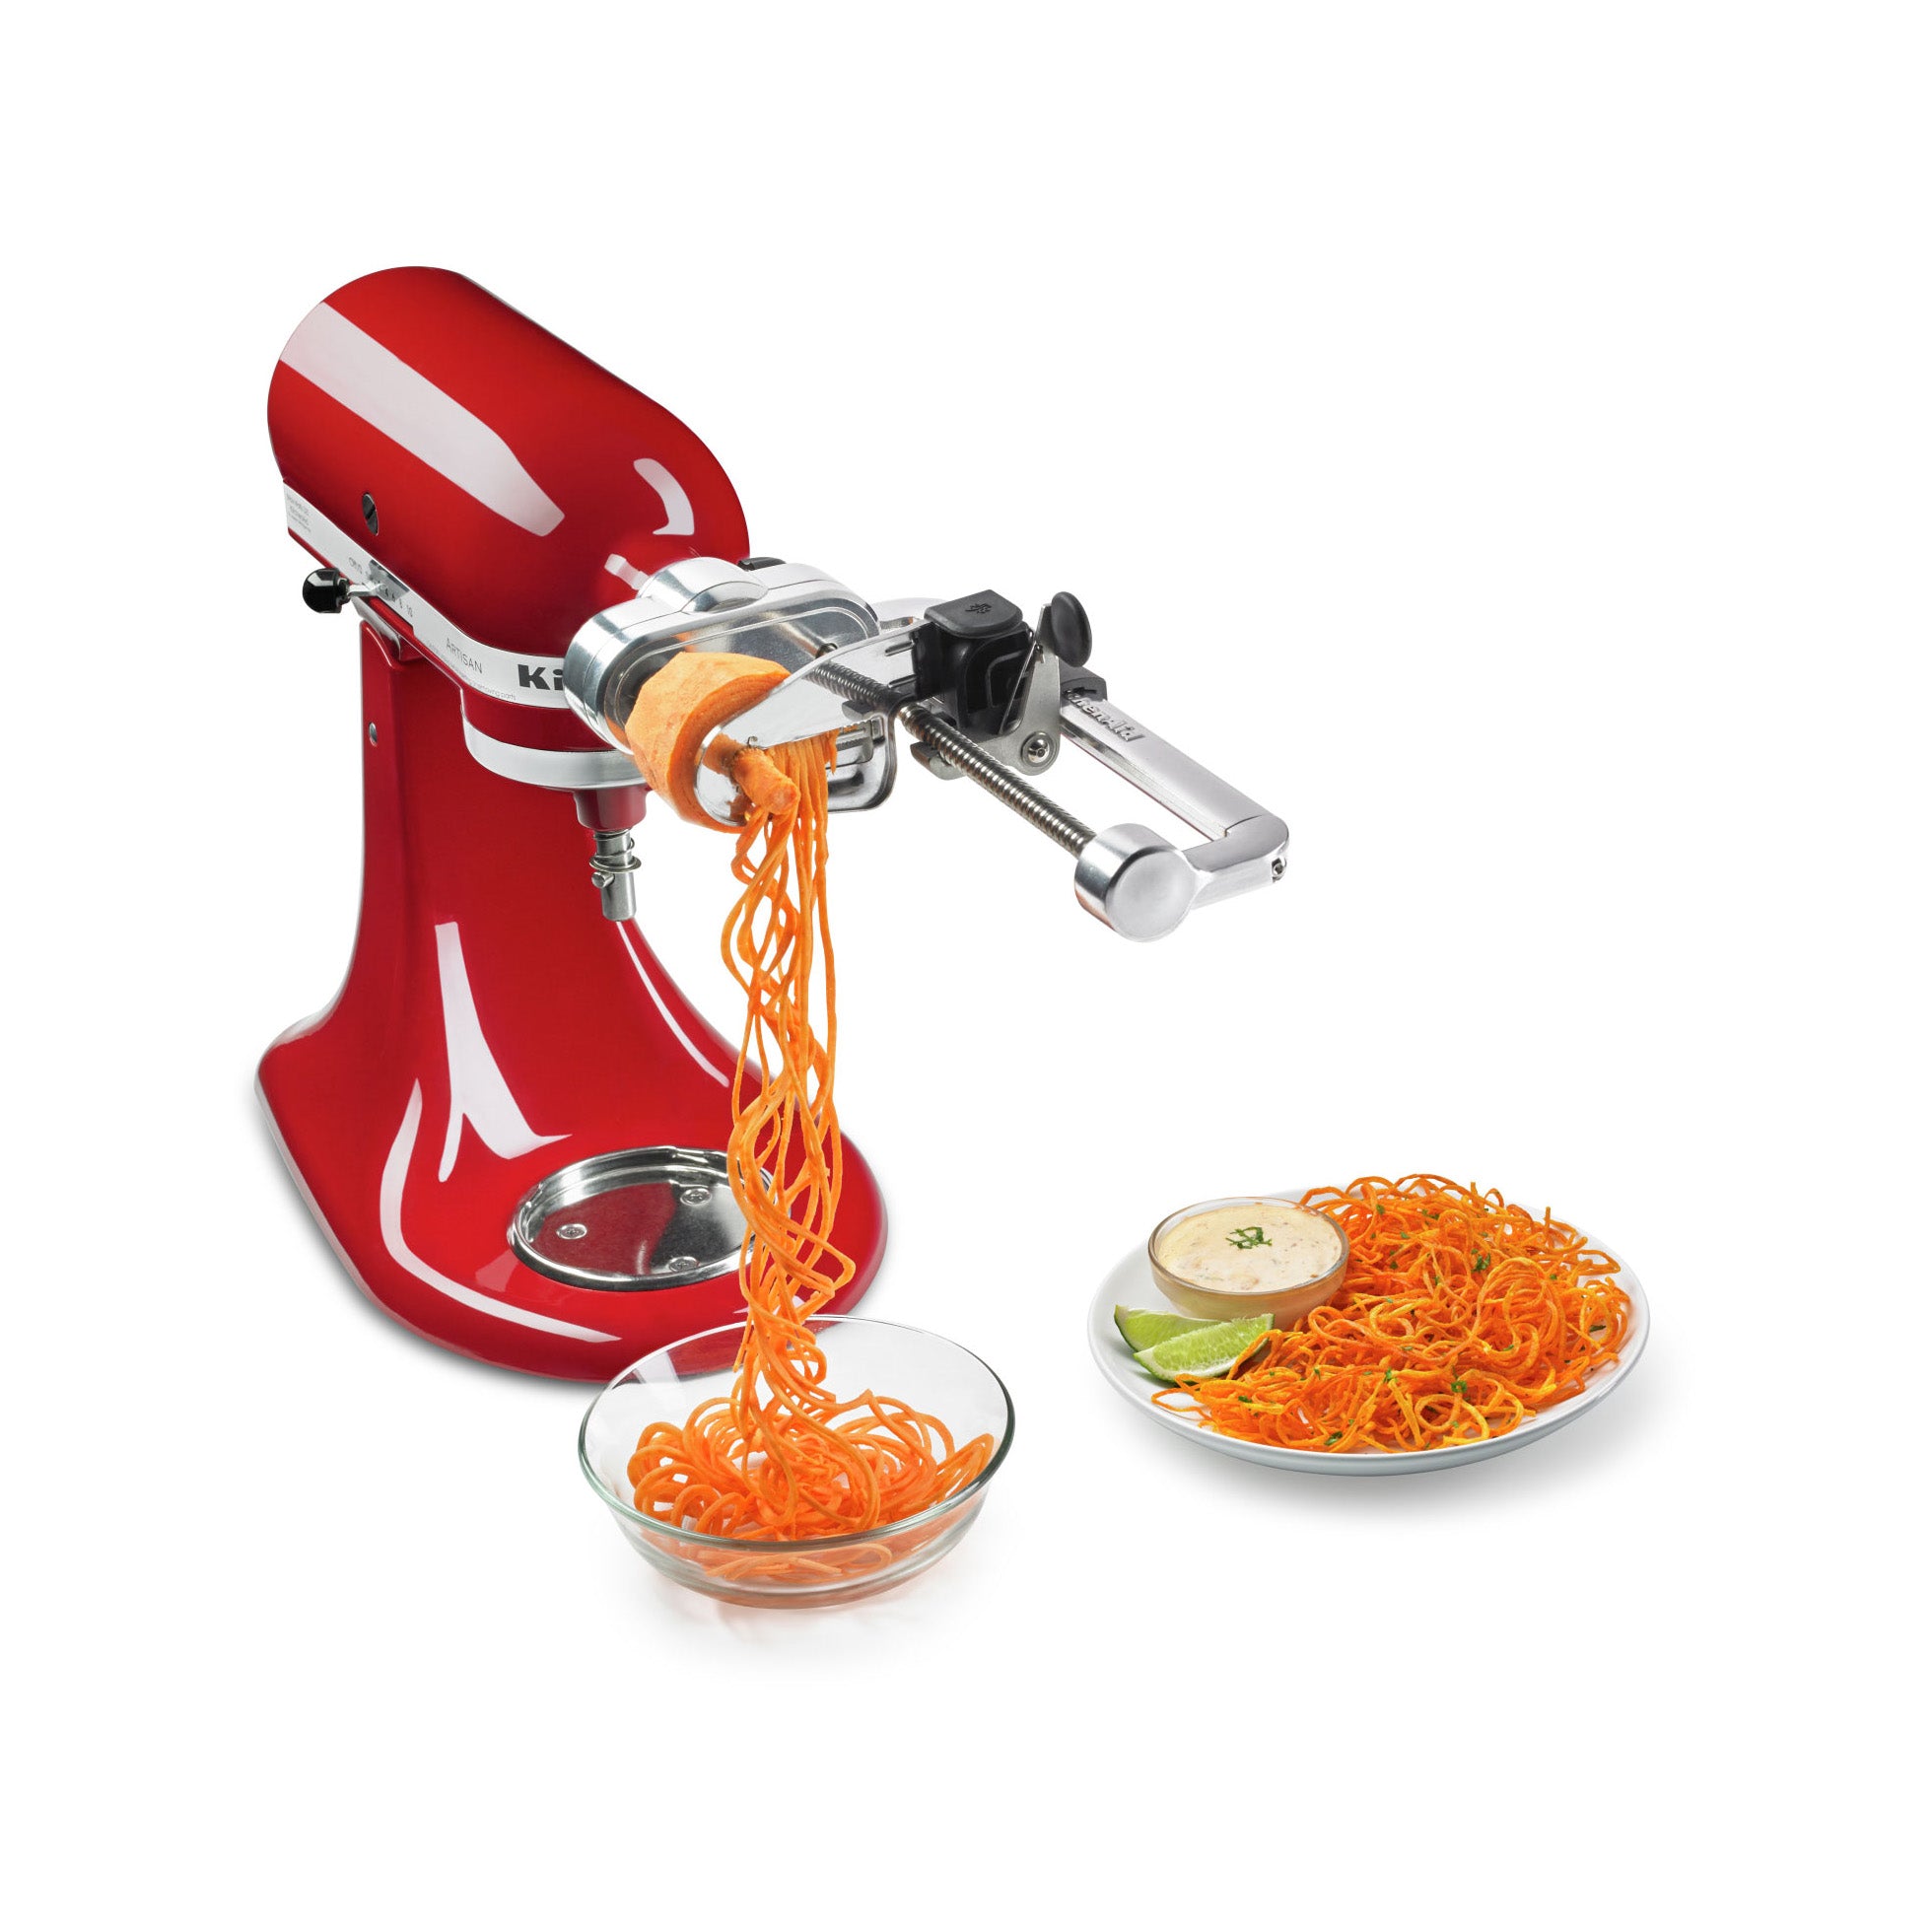 KITCHENAID 7 Blade Spiralizer Plus with Peel, Core and Slice Attachment